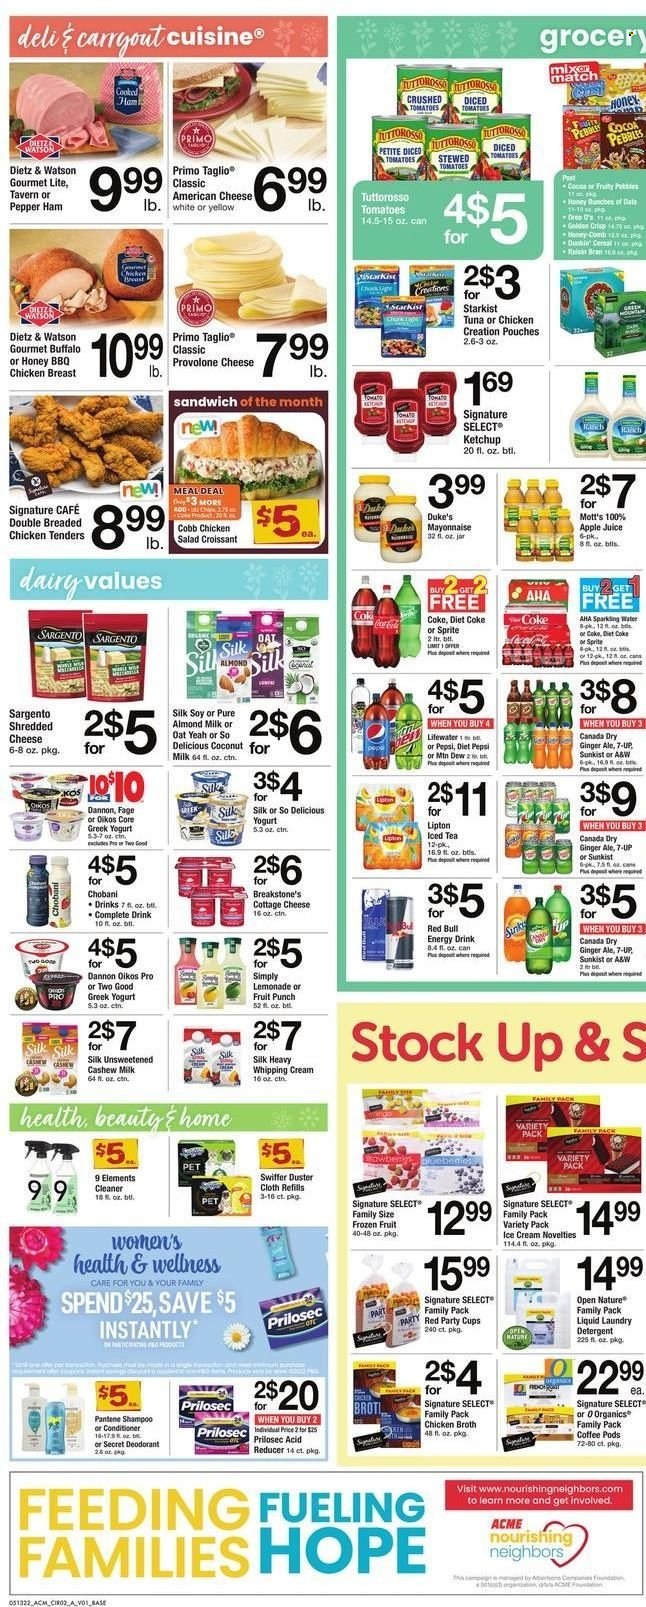 thumbnail - ACME Flyer - 05/13/2022 - 05/19/2022 - Sales products - croissant, tomatoes, salad, Mott's, tuna, StarKist, sandwich, fried chicken, cooked ham, ham, Dietz & Watson, american cheese, cottage cheese, shredded cheese, Provolone, Sargento, greek yoghurt, Oreo, yoghurt, Oikos, Chobani, Dannon, almond milk, whipping cream, mayonnaise, ice cream, chicken broth, broth, crushed tomatoes, diced tomatoes, cereals, Raisin Bran, pepper, ketchup, apple juice, Canada Dry, Coca-Cola, ginger ale, lemonade, Mountain Dew, Sprite, Pepsi, juice, energy drink, Lipton, ice tea, Diet Pepsi, Diet Coke, 7UP, Red Bull, A&W, fruit punch, coffee pods, detergent, cleaner, Swiffer, laundry detergent, shampoo, conditioner, Pantene, anti-perspirant, deodorant, duster, duster cloth, cup, party cups, t-shirt. Page 2.